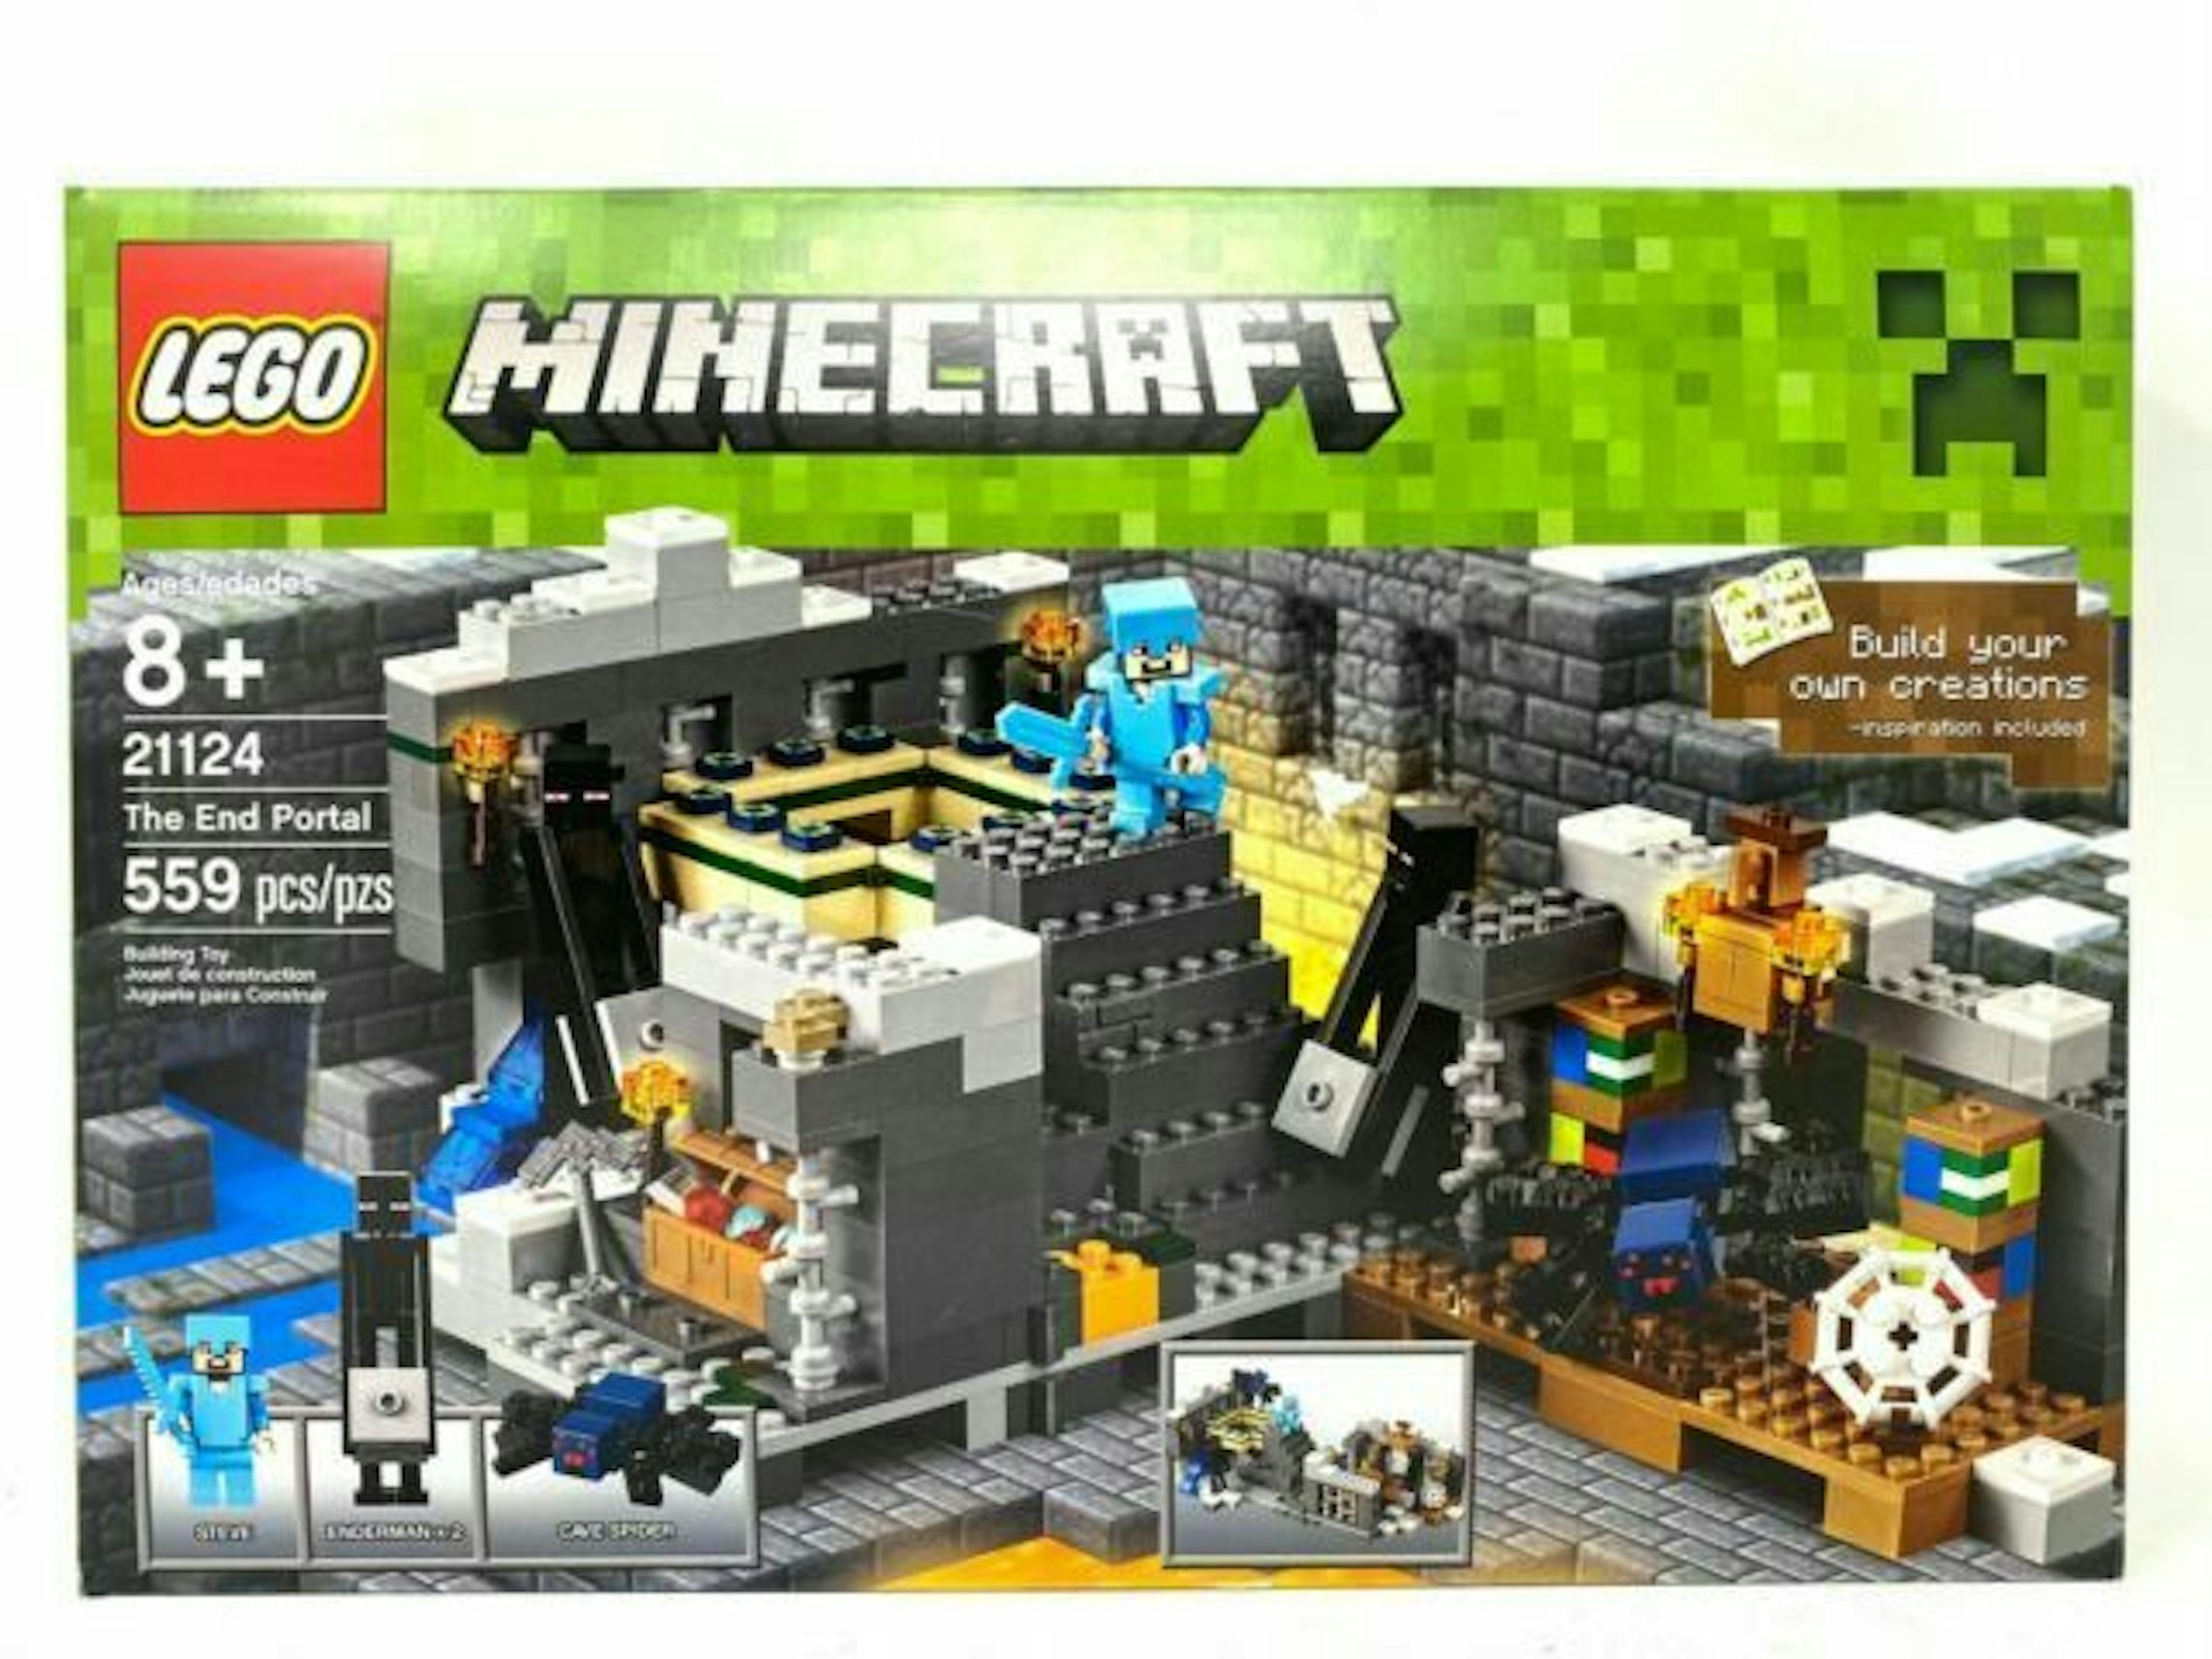 LEGO Minecraft 21126 The Wither Set *No Minifigures* NEW